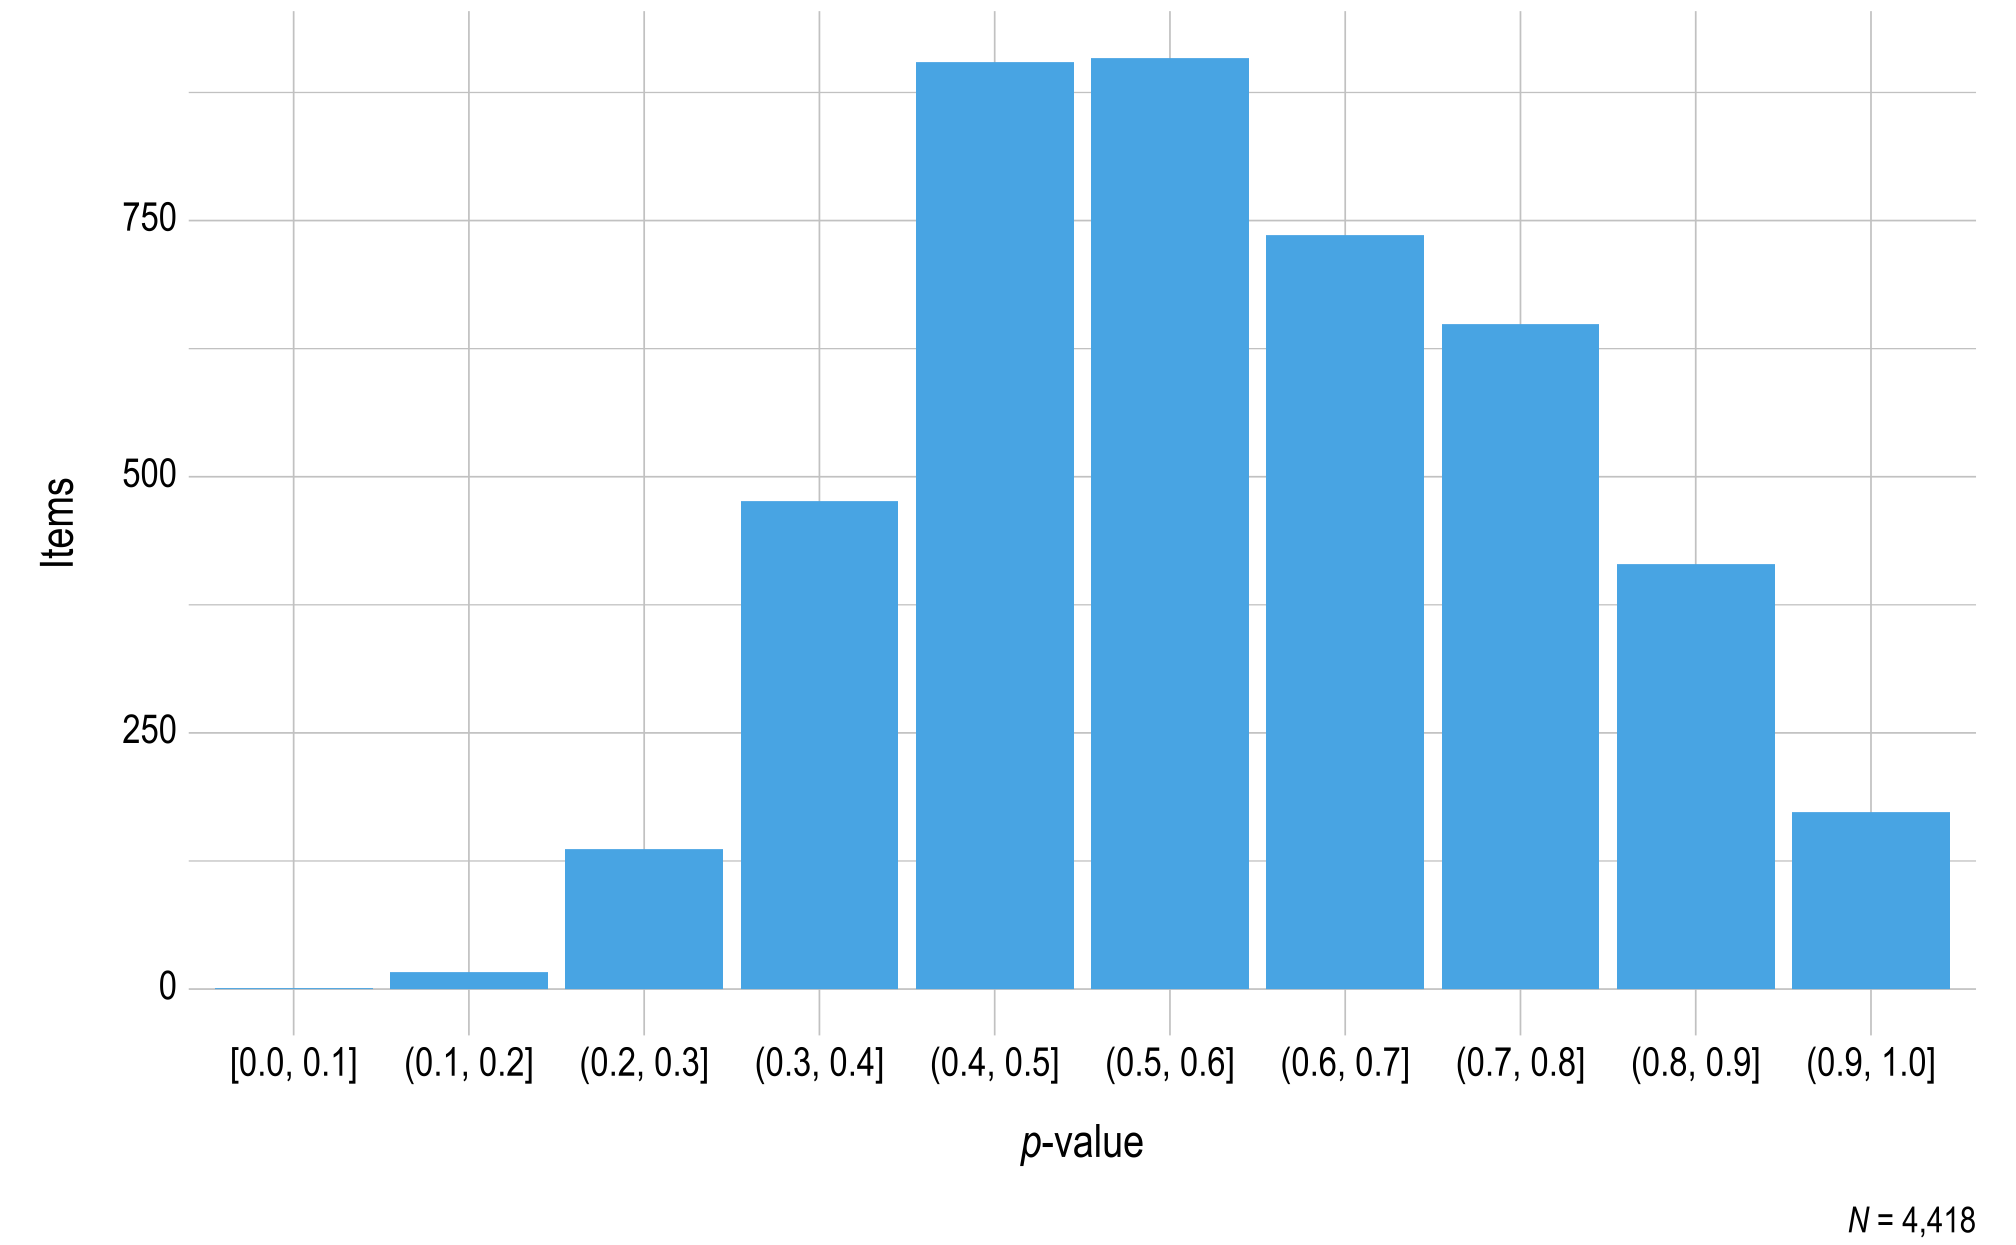 A histogram displaying p-value on the x-axis and the number of mathematics operational items on the y-axis.